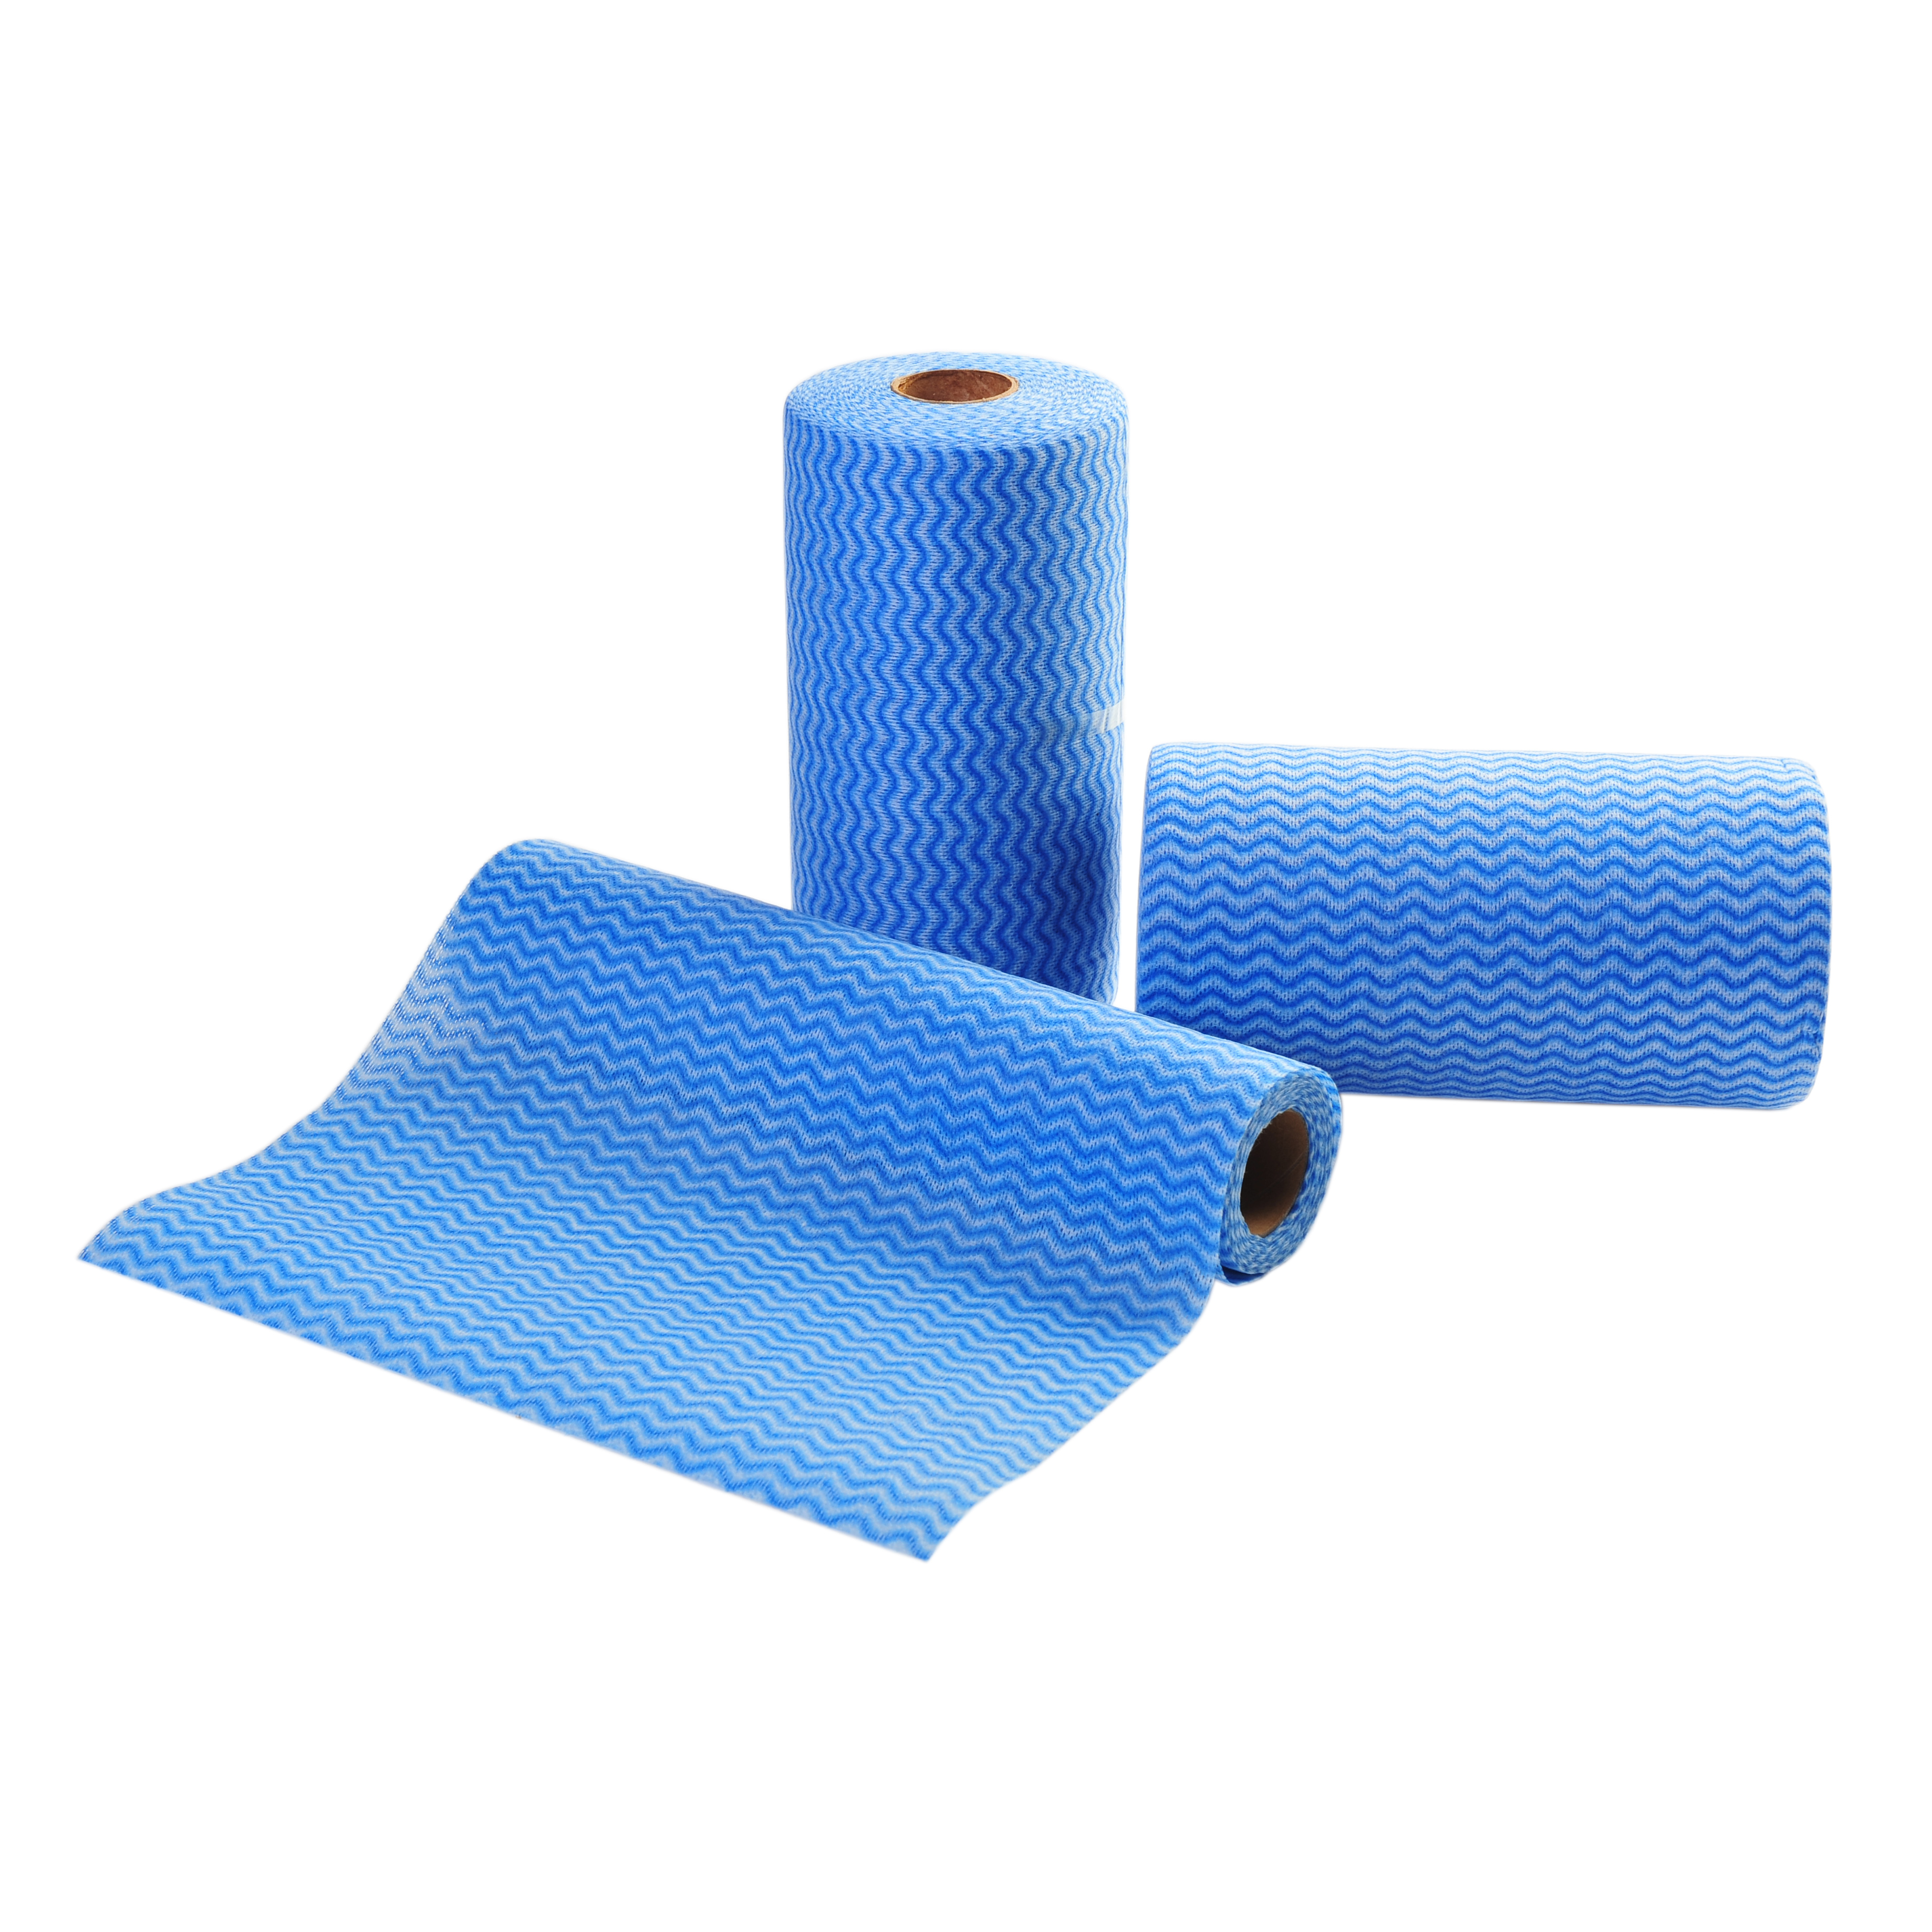 Multipurpose Non Woven Cleaning Cloth